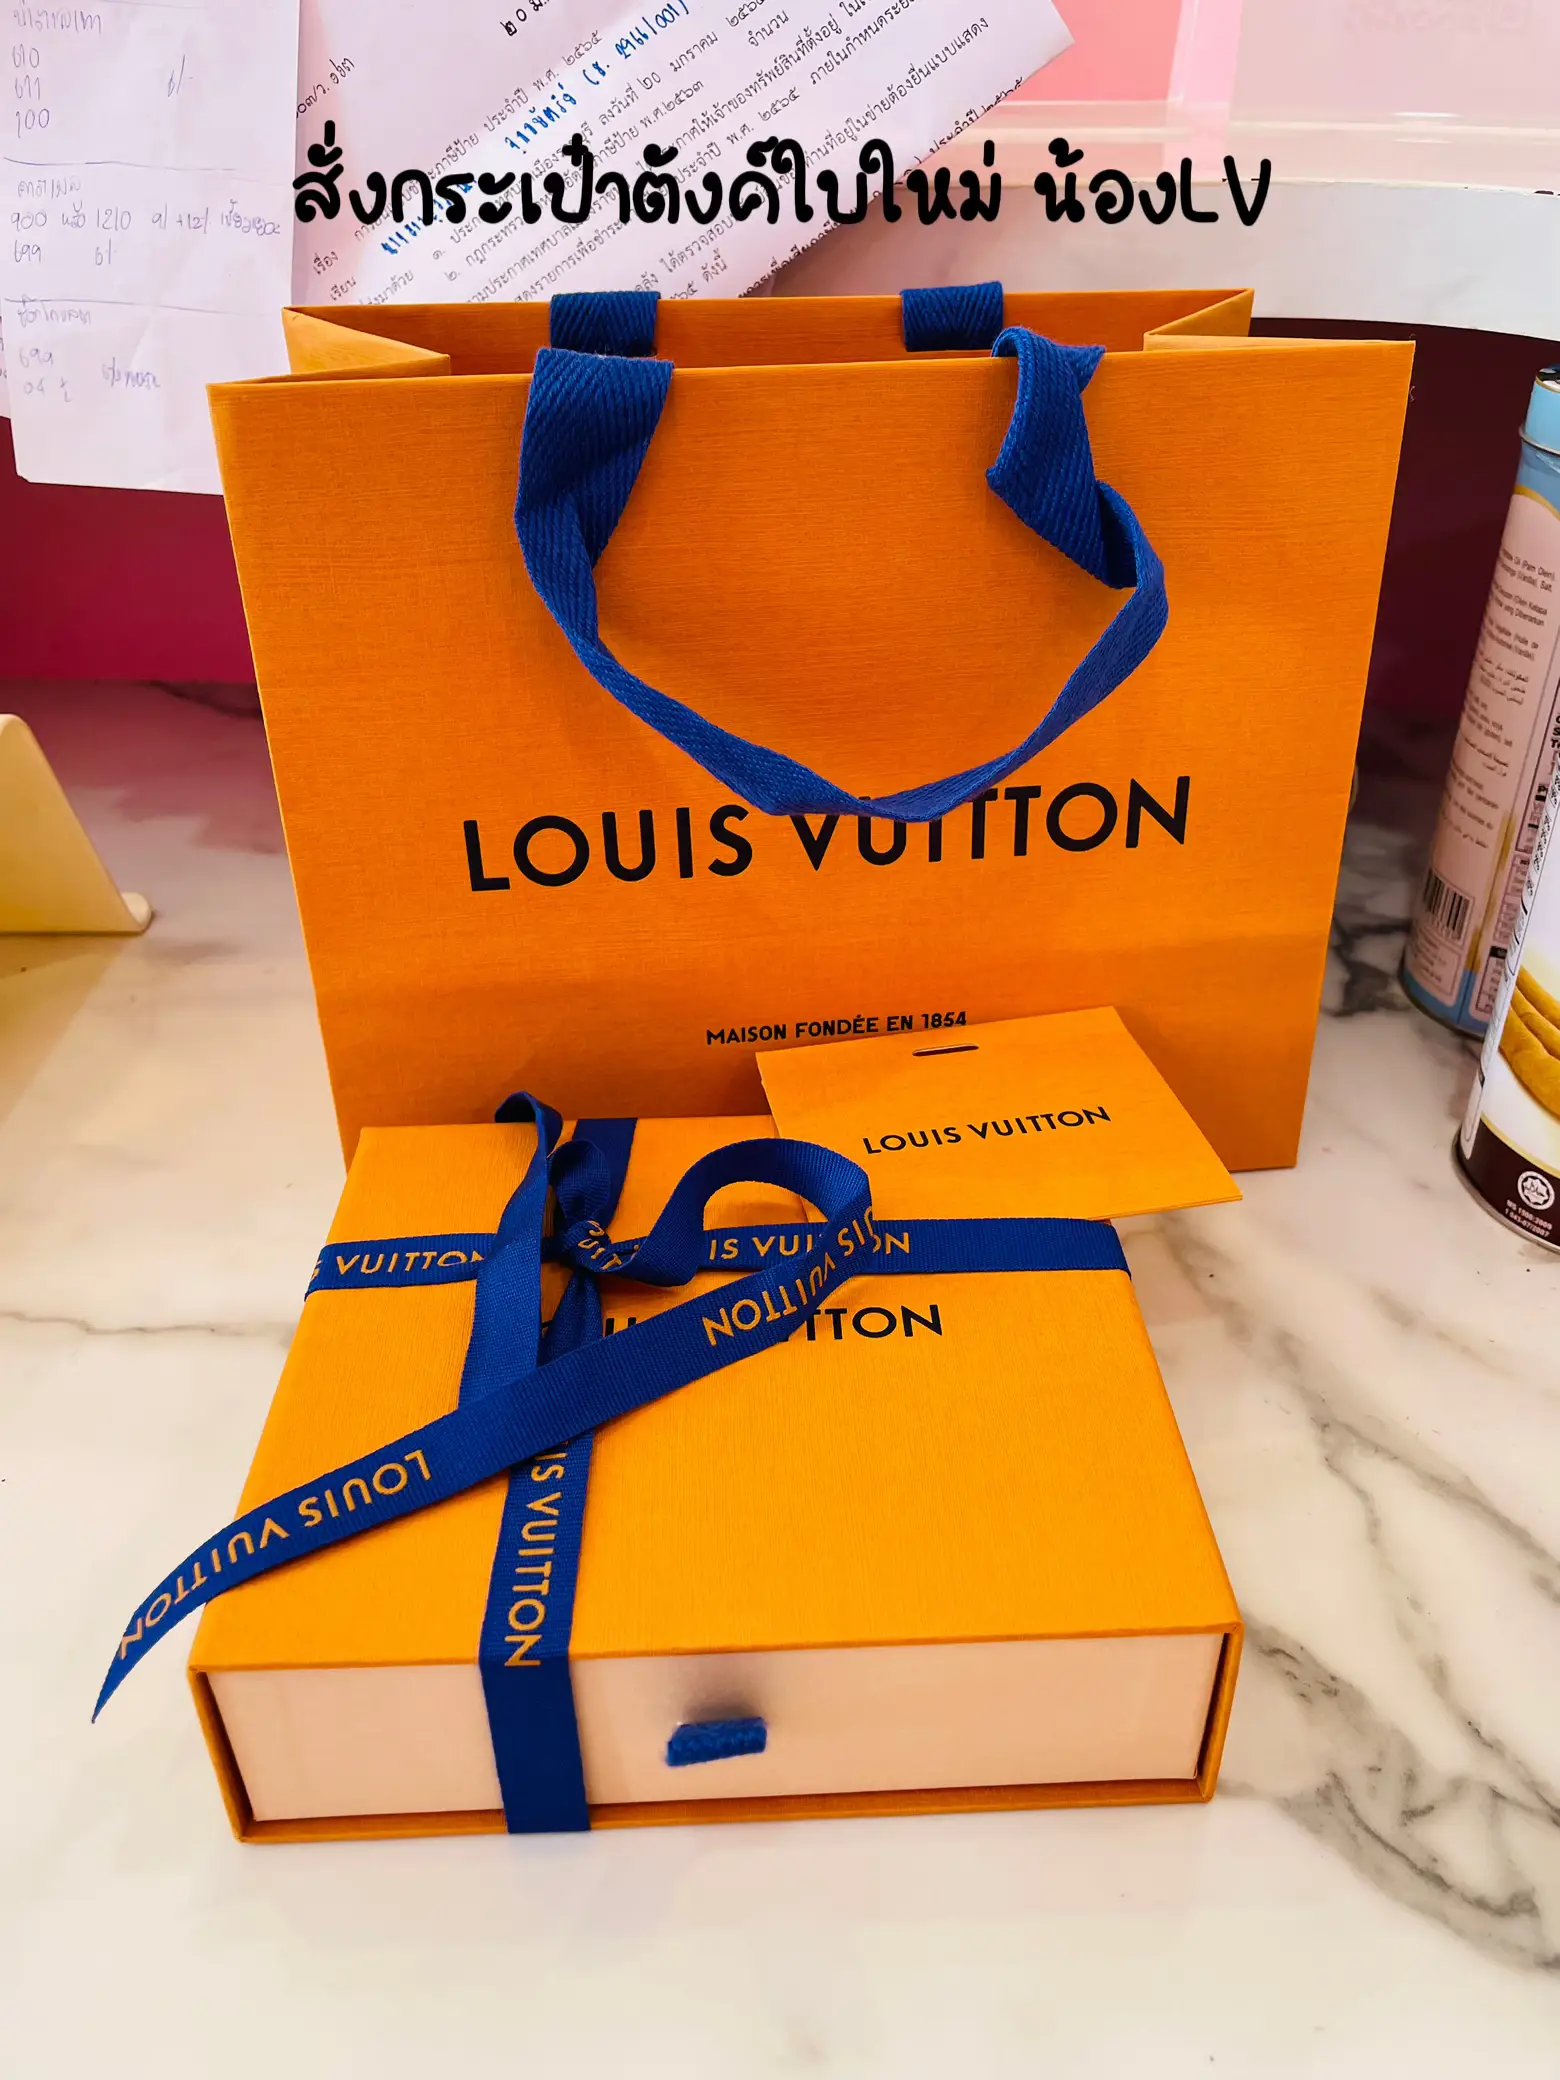 Lot - LOUIS VUITTON BOX WITH DUST COVER BAG & A FRENCH PERFUME BOTTLE